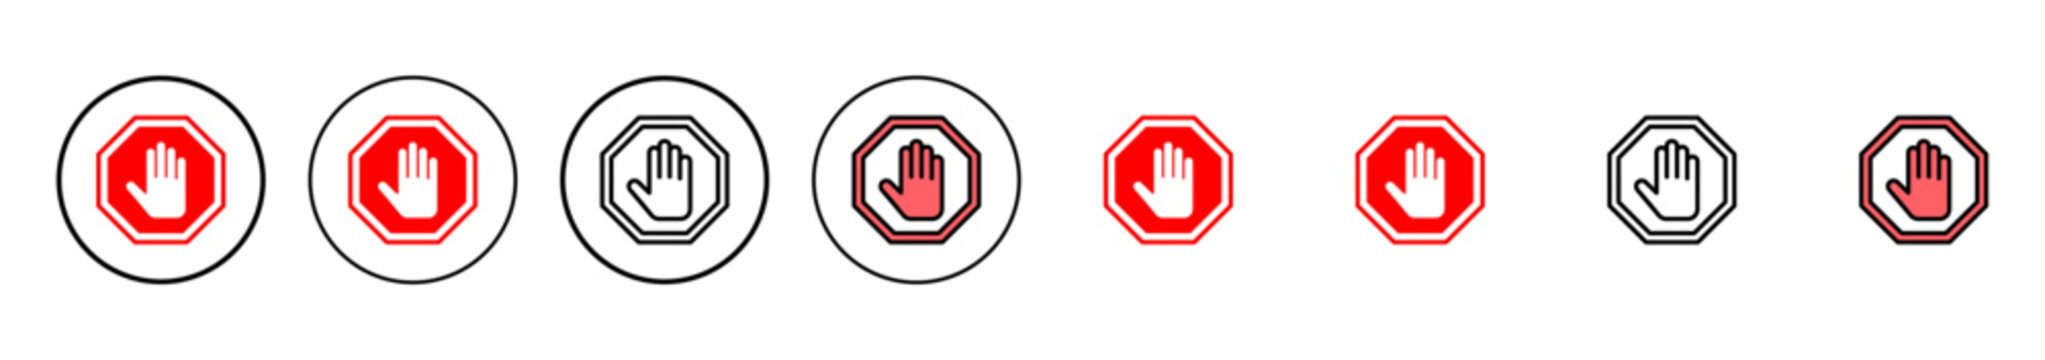 Stop icon vector illustration. stop road sign. hand stop sign and symbol. Do not enter stop red sign with hand